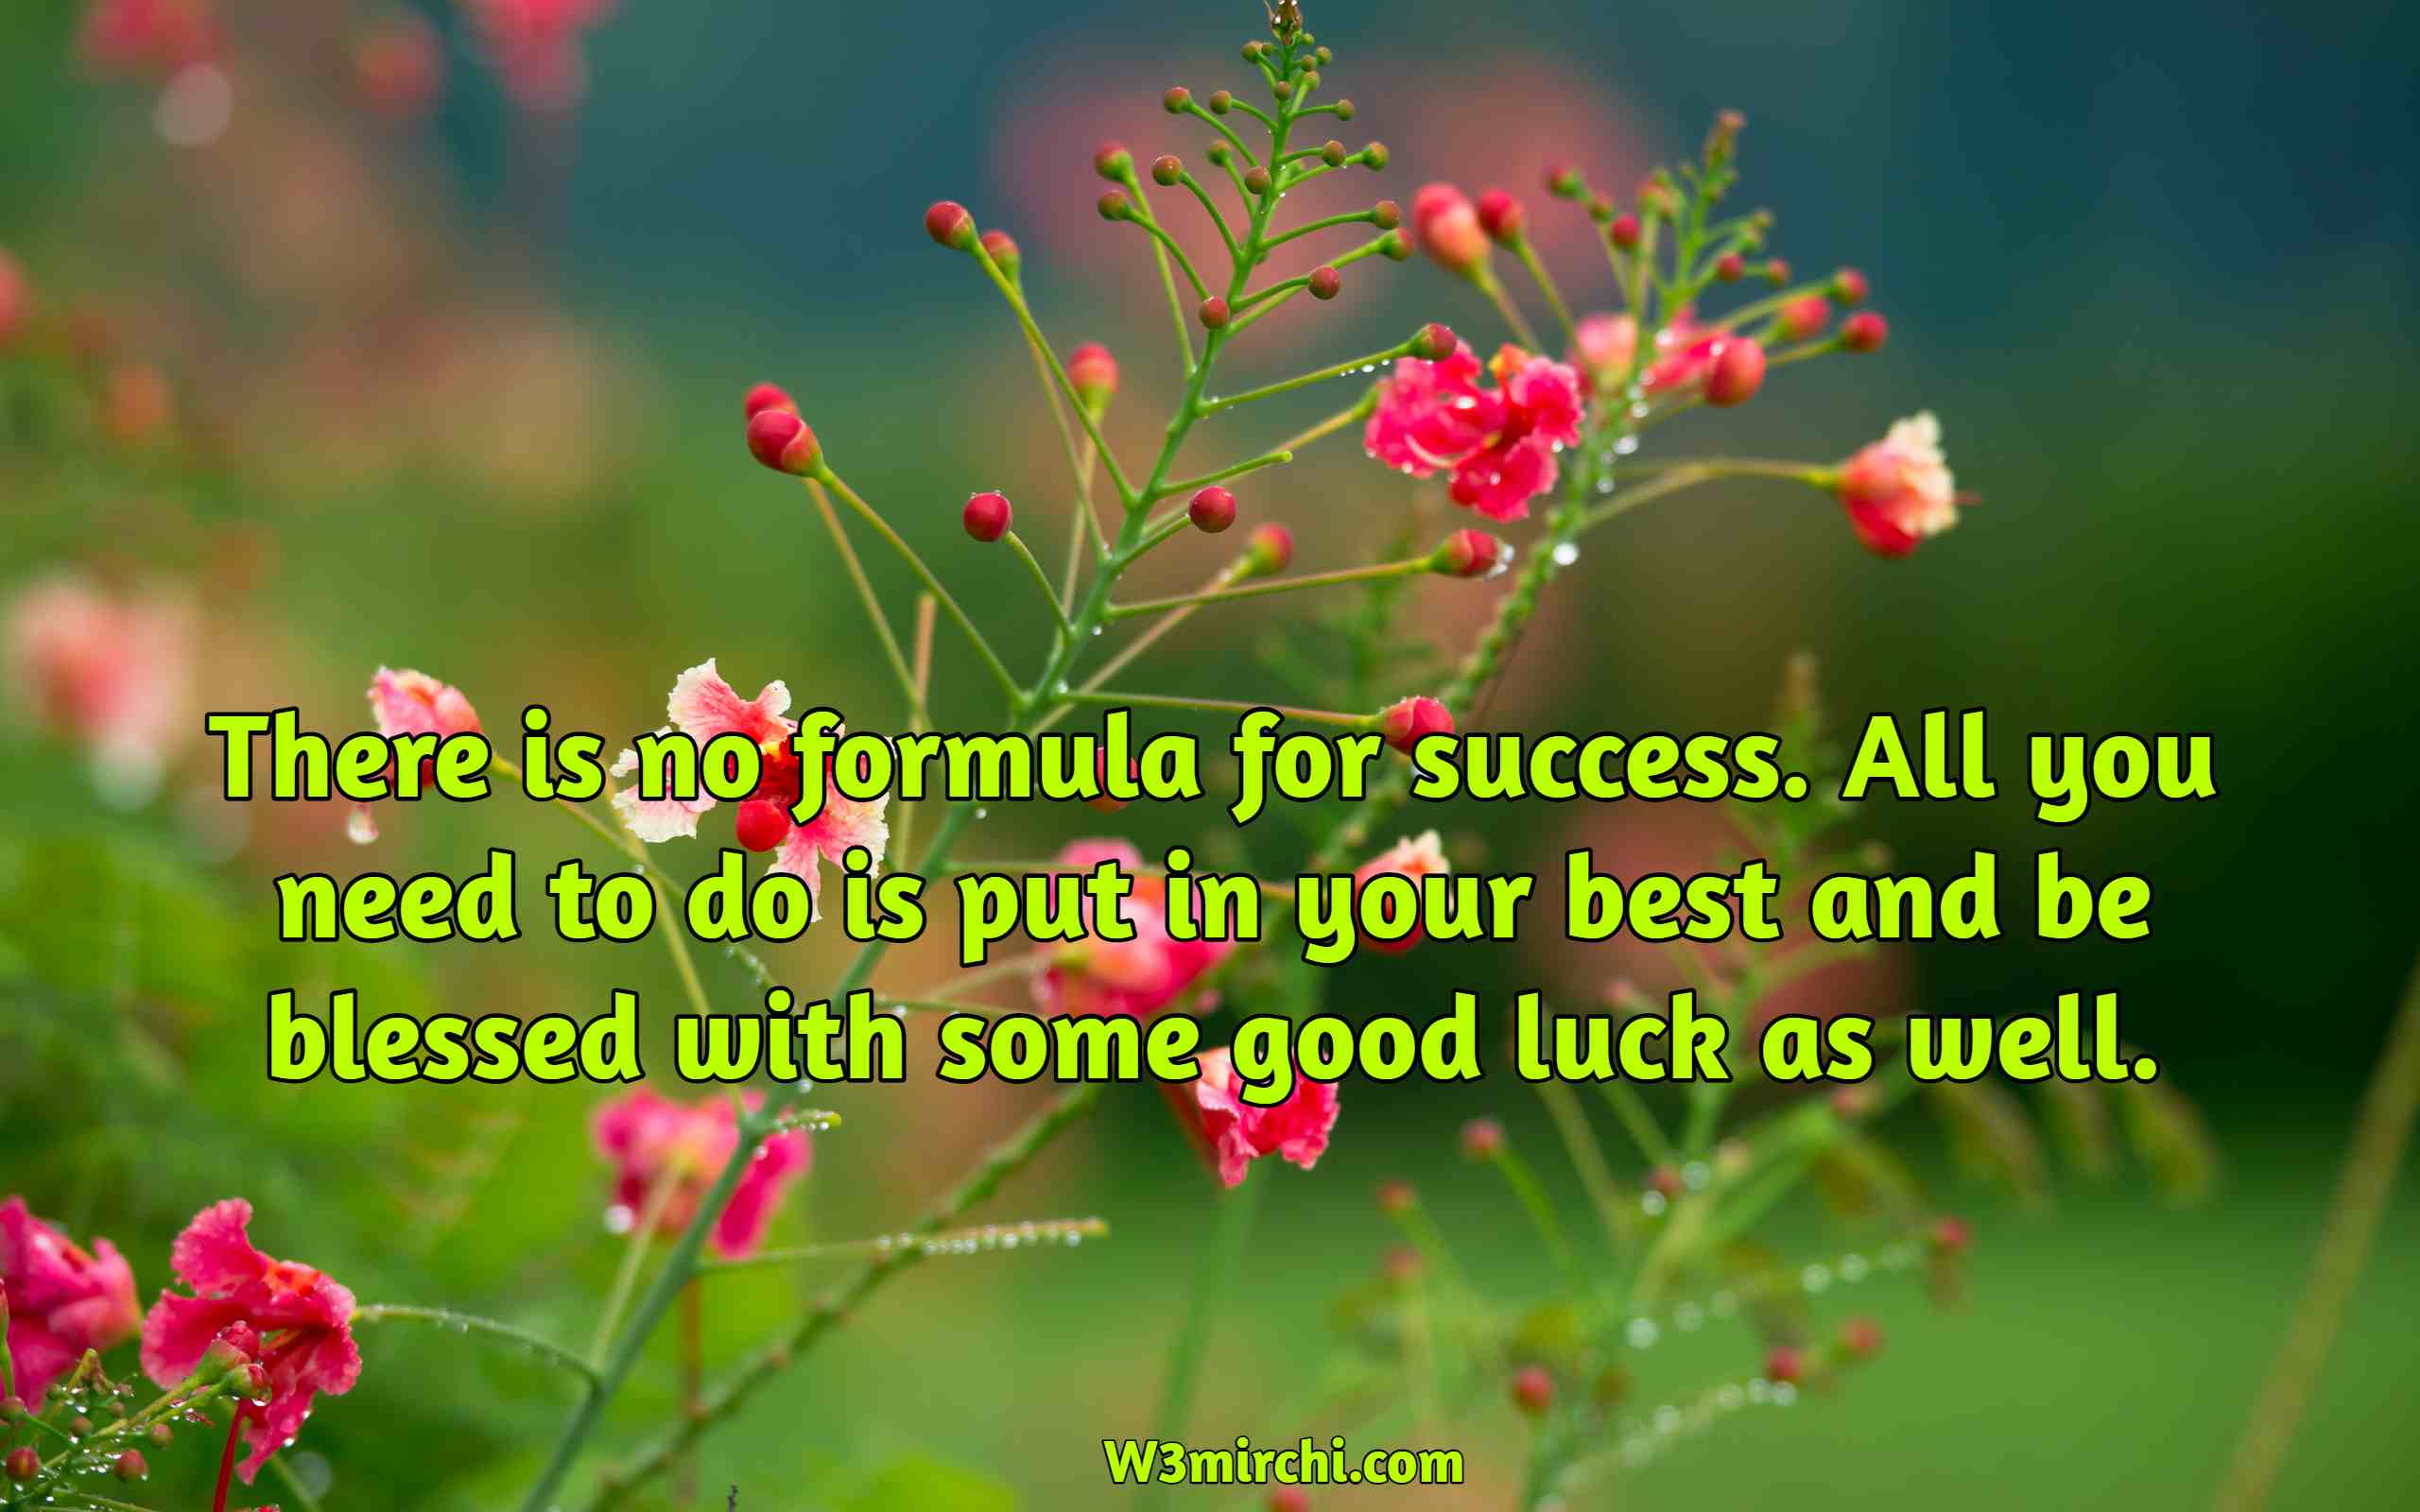 There is no formula for success.